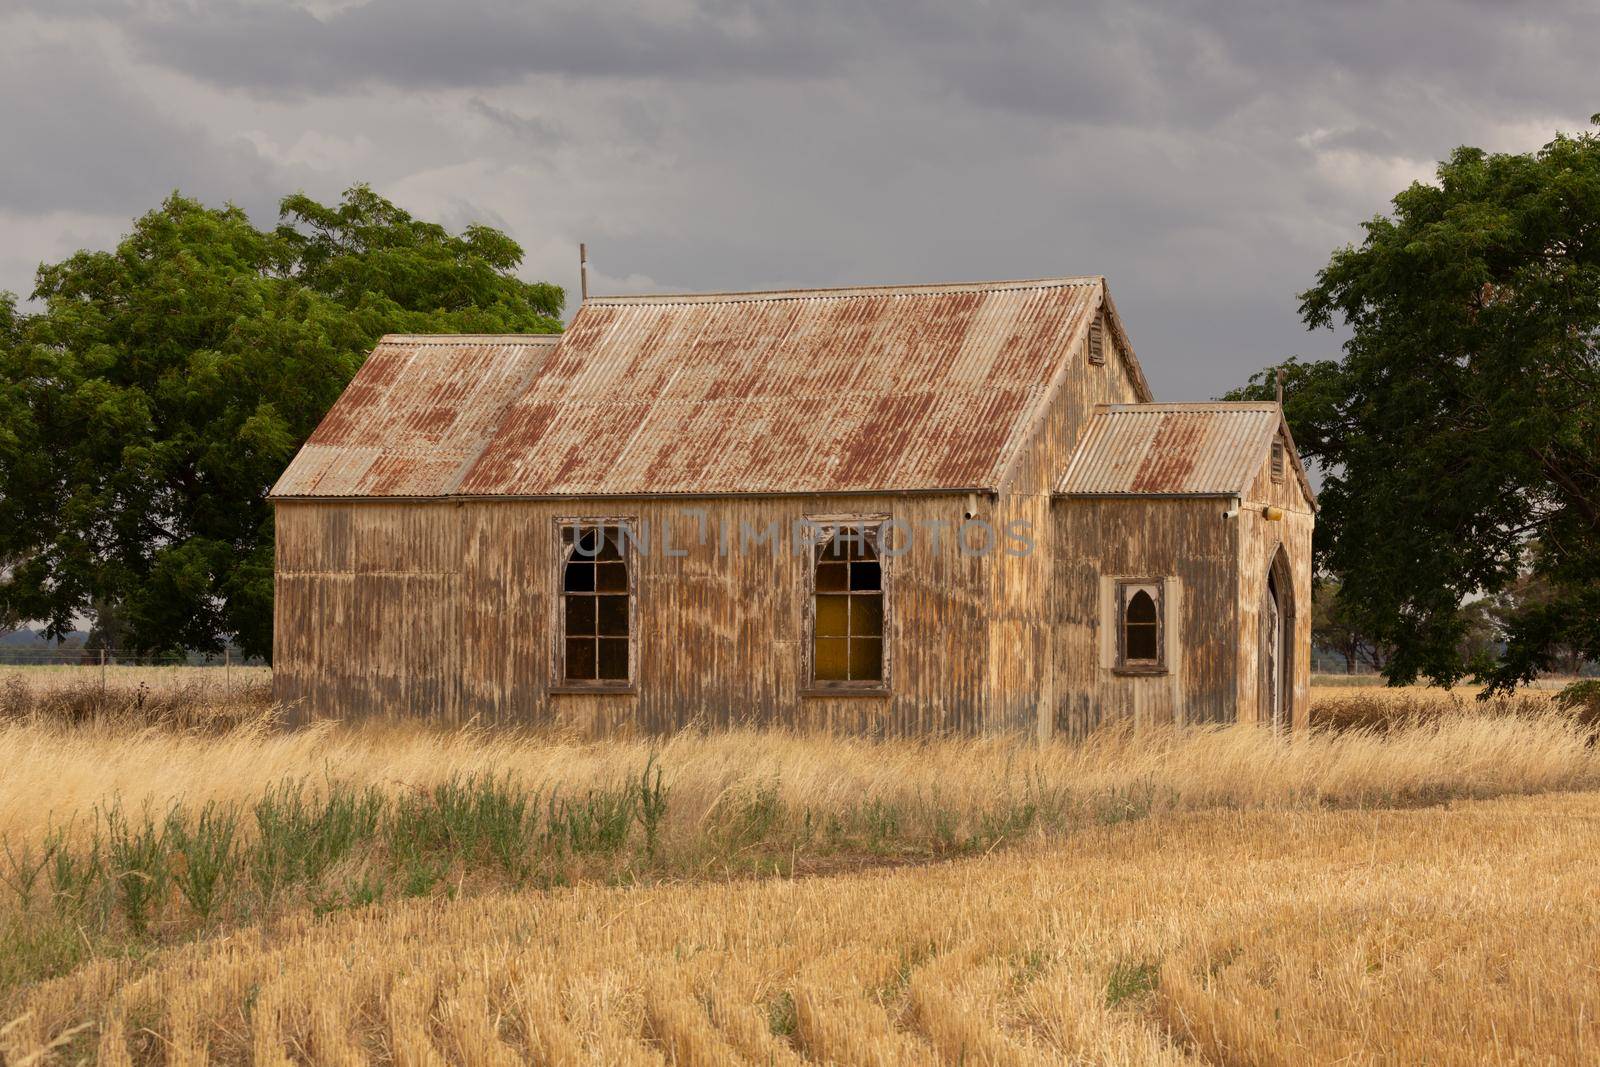 Rustic old abandoned church in rural NSW Australia with recently harvested crop